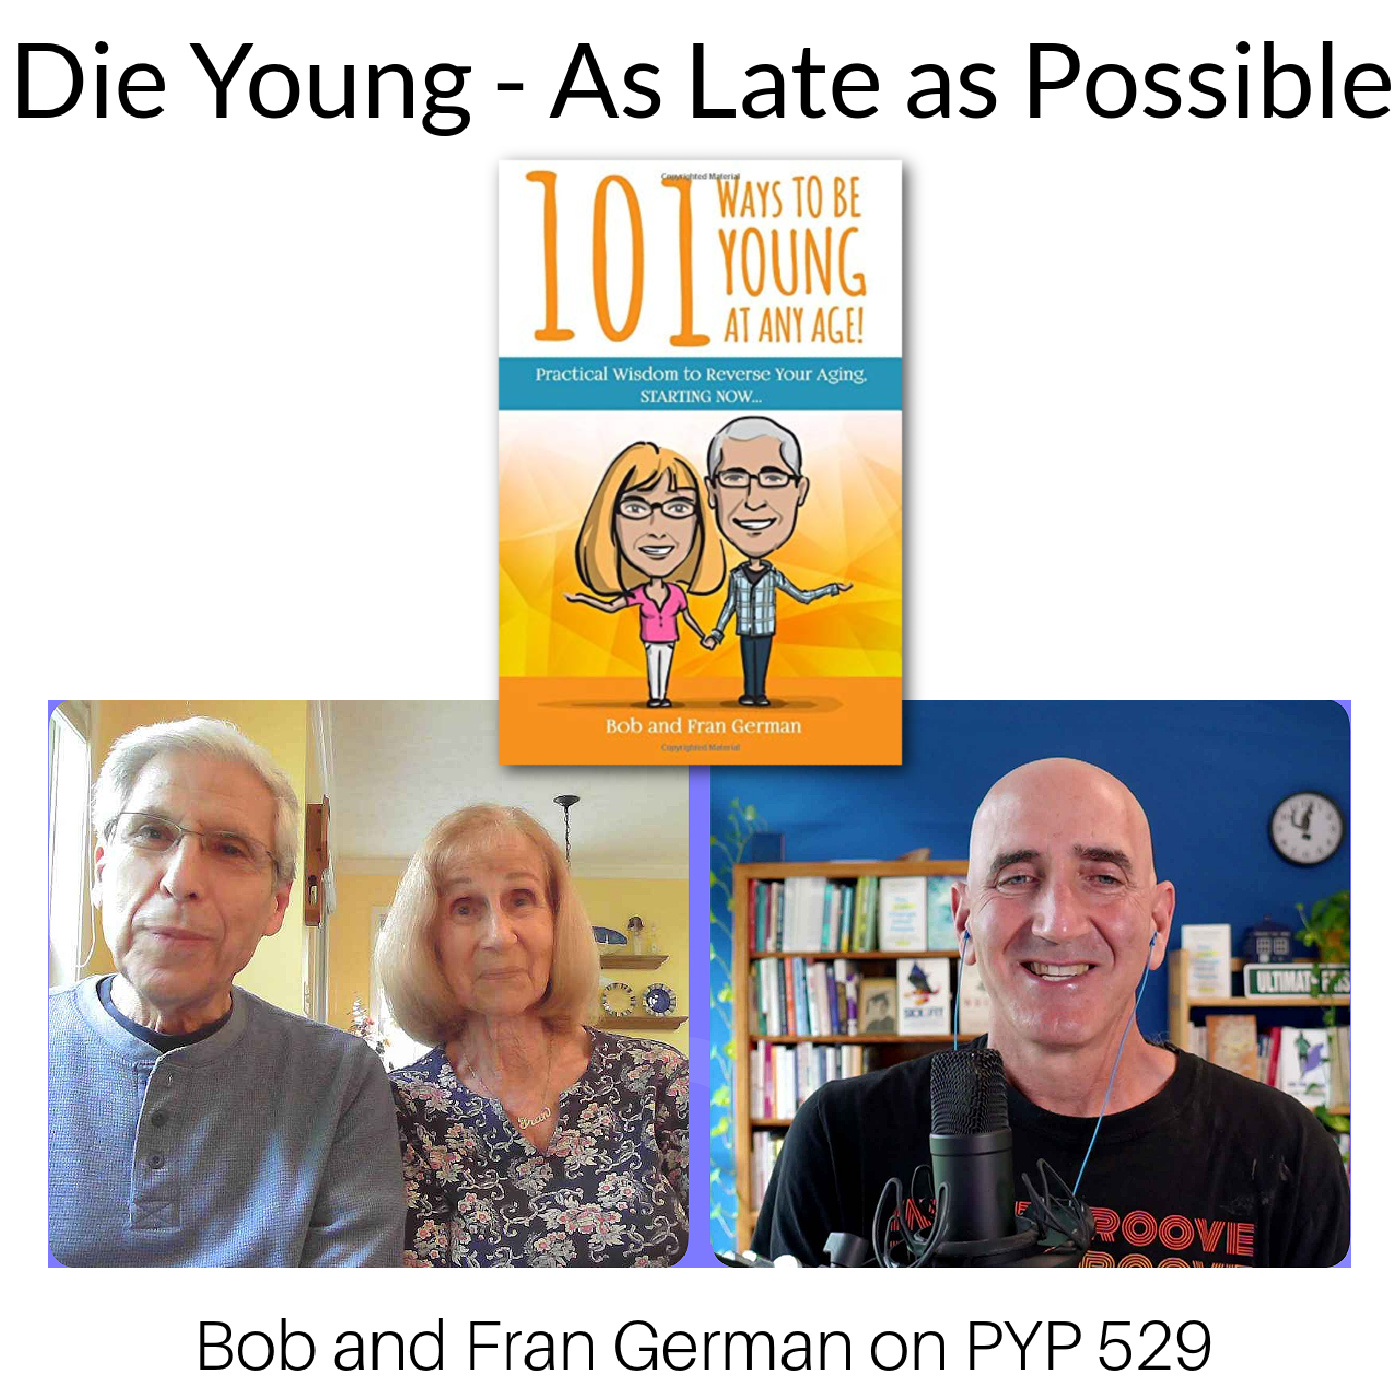 Die Young - As Late as Possible: Bob and Fran German on PYP 529